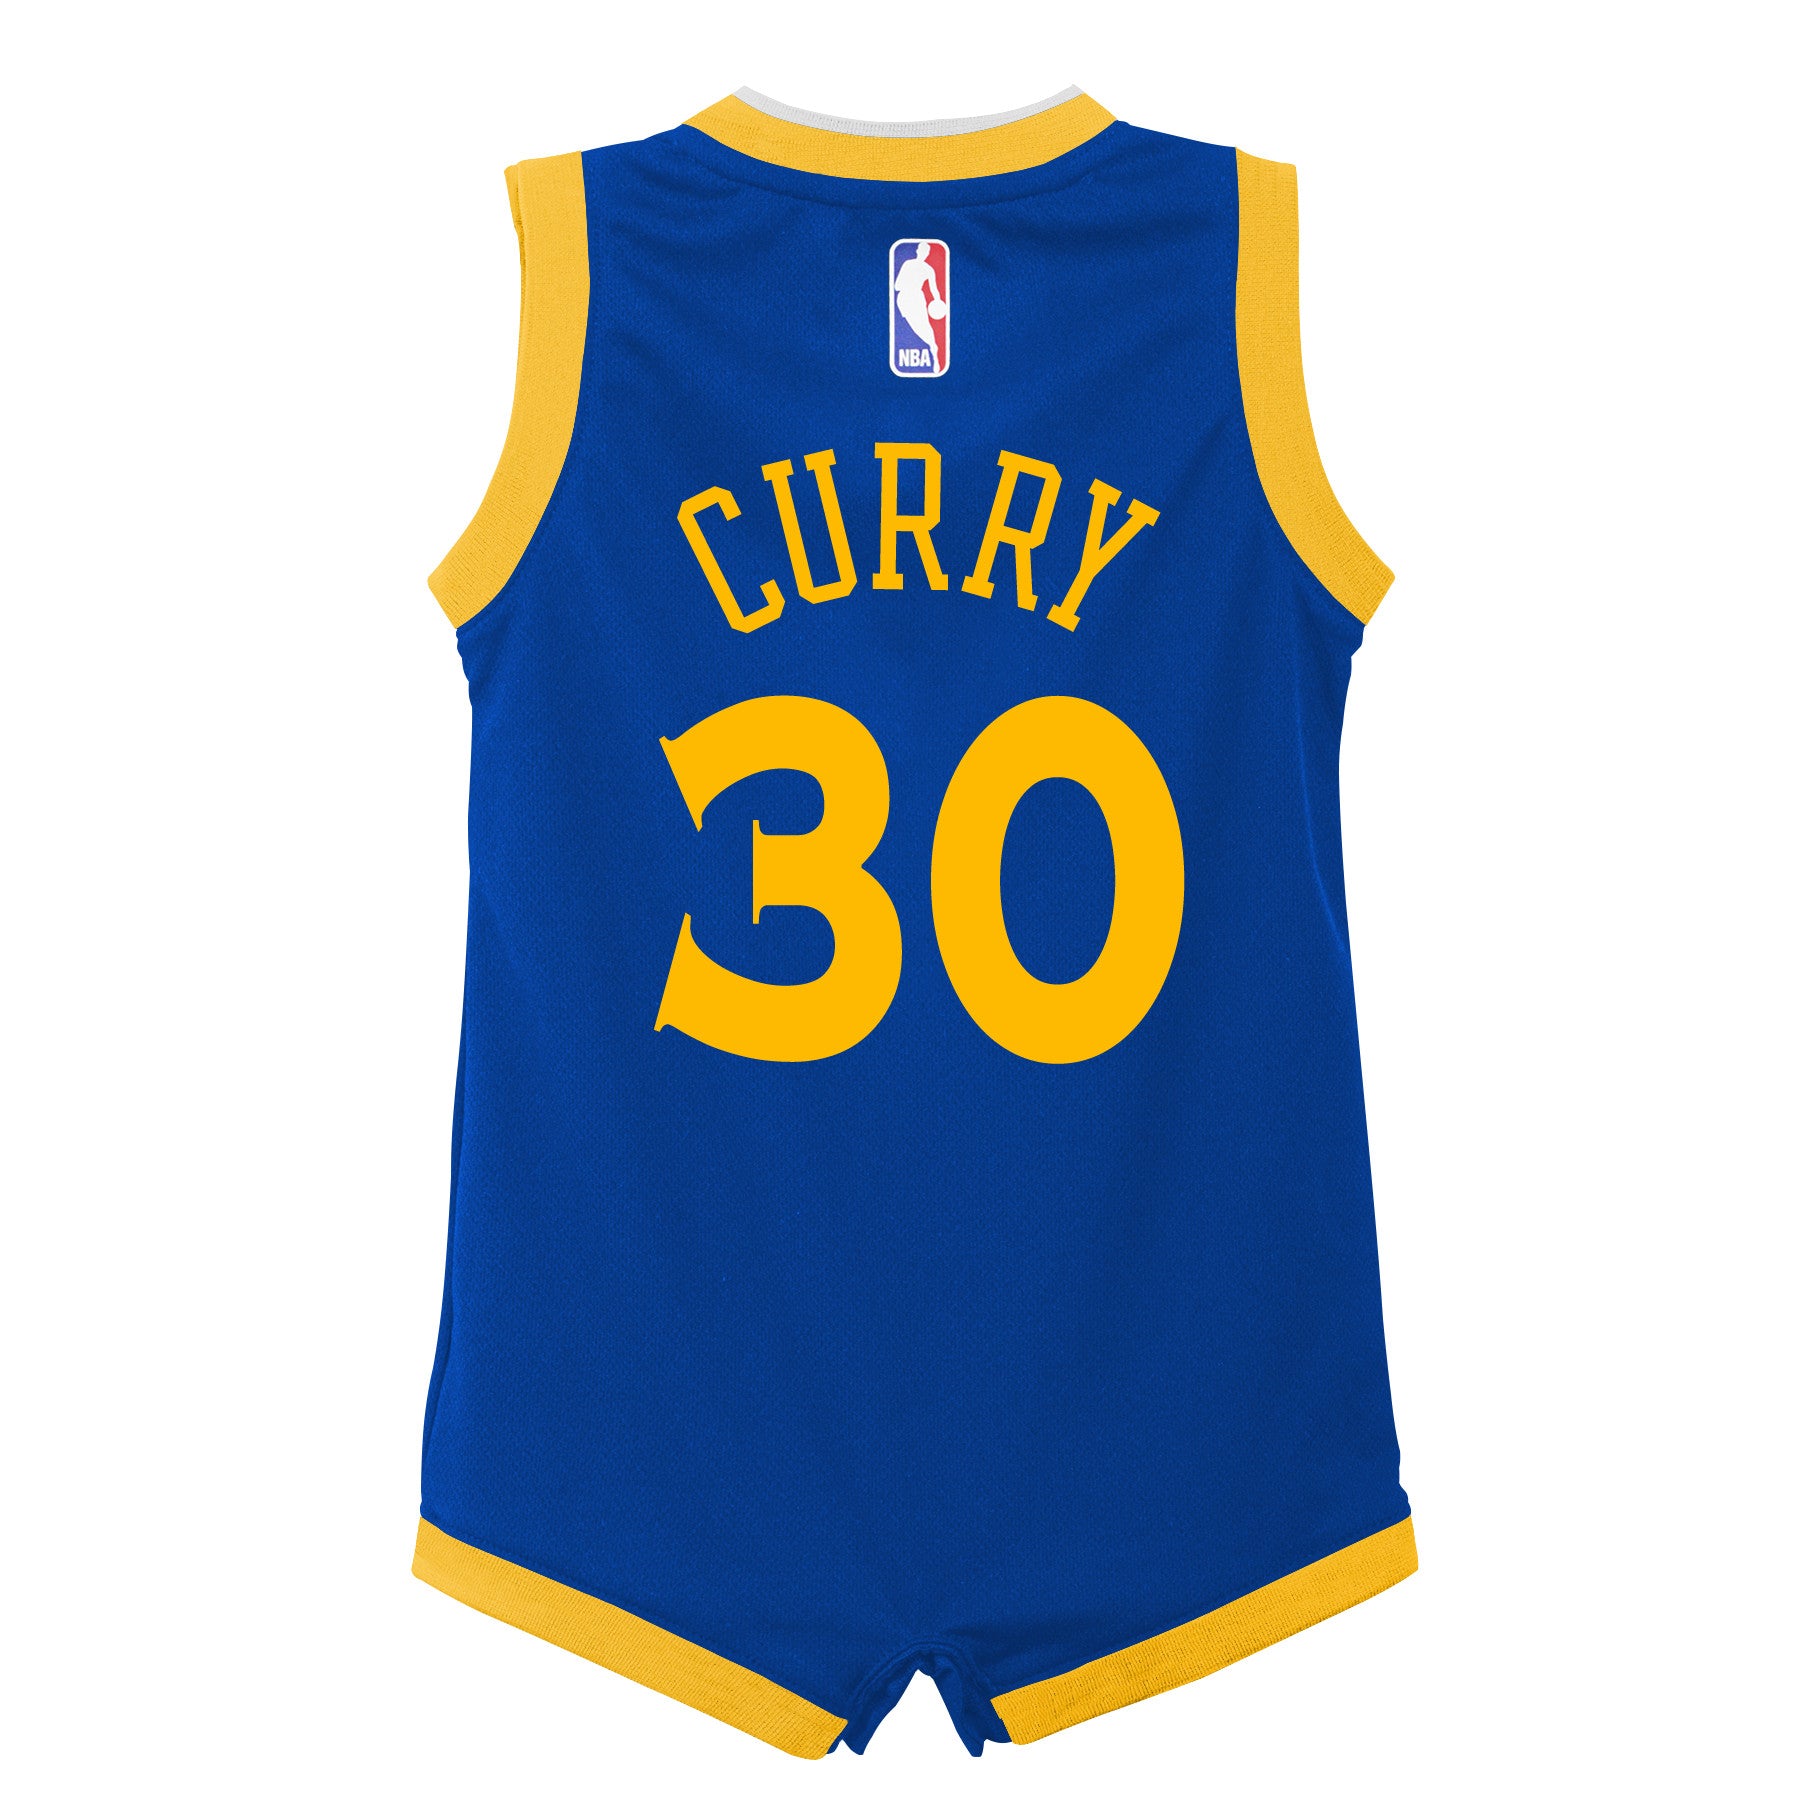 stephen curry jersey canada